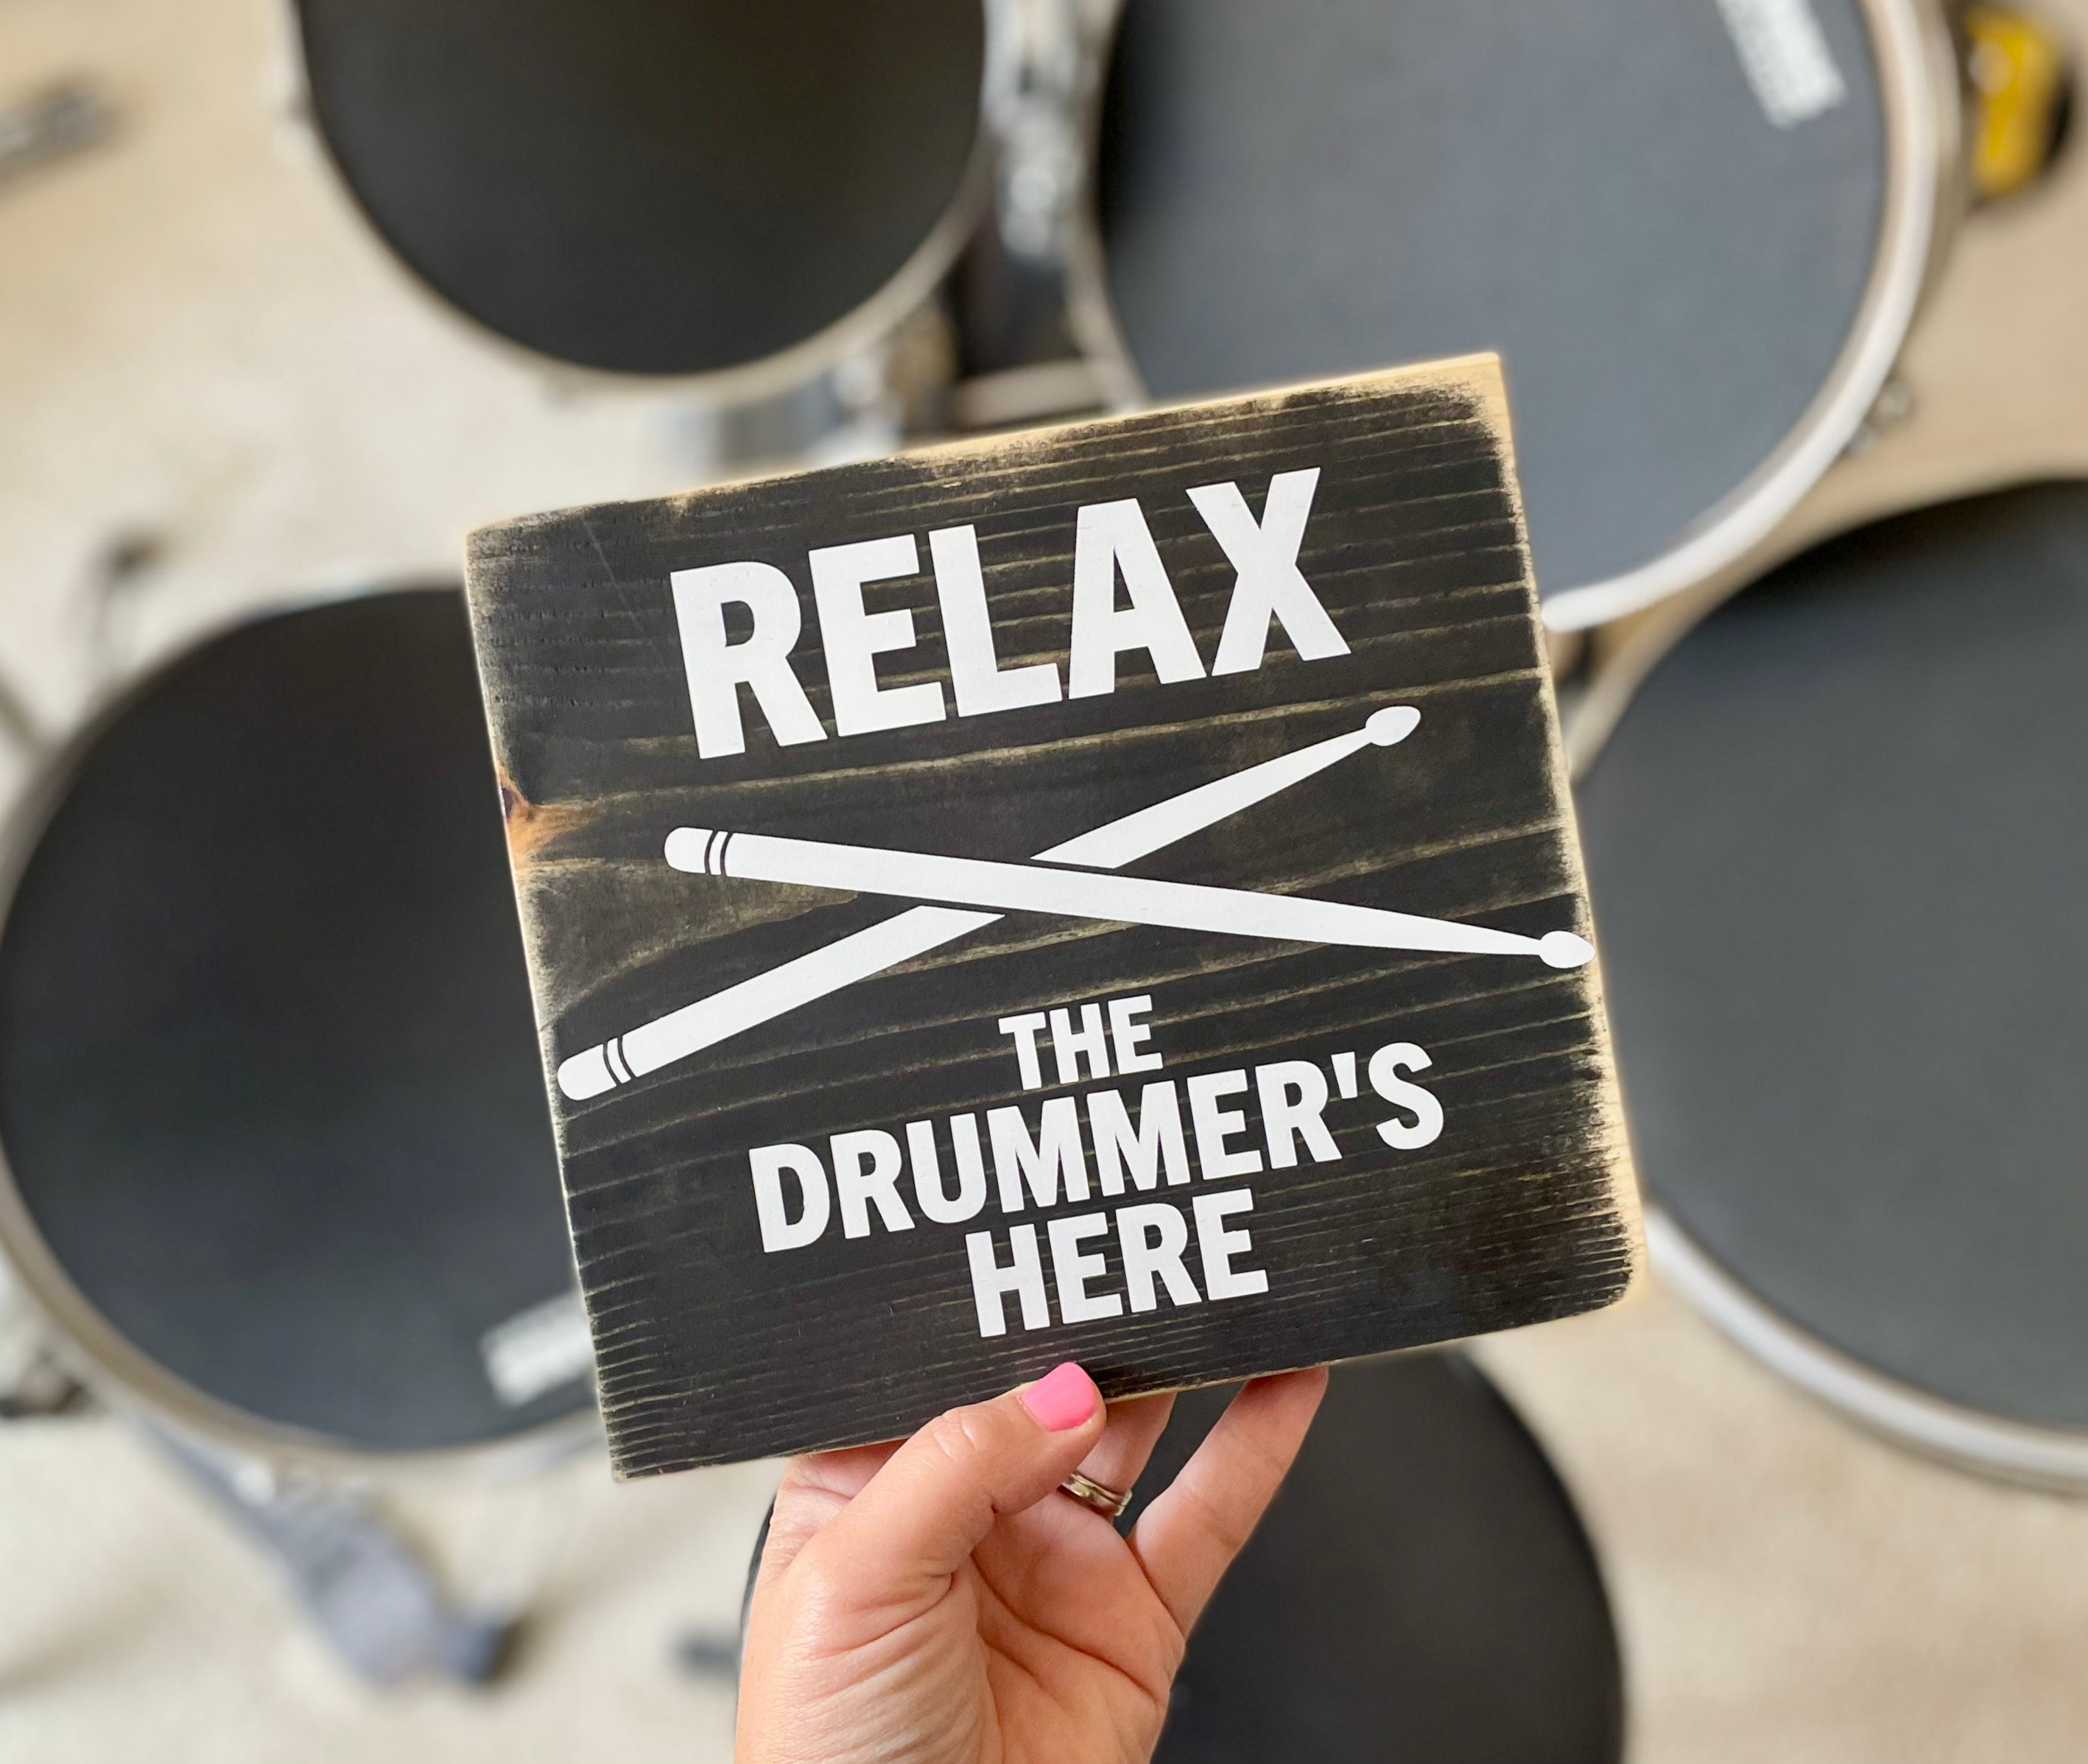 A black, wood sign with white lettering is being held in front of a drum kit that is blurred in the background. The sign reads: "Relax the Drummer's Here." A white pair of drumsticks is painted in an x under the word relax.